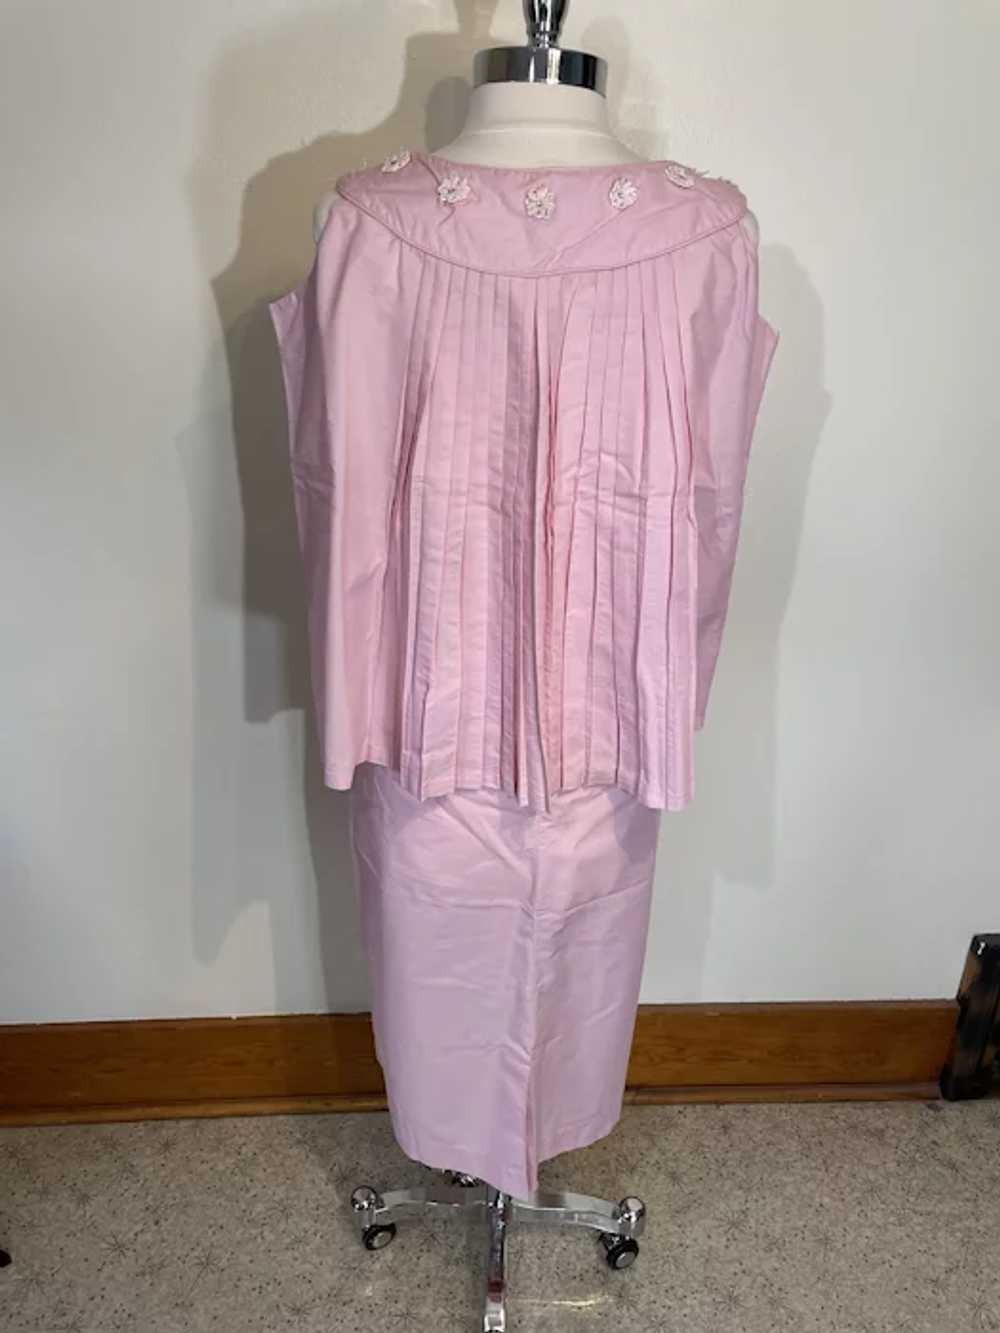 Vintage 1950s Pink Cotton Maternity Top and Skirt - image 3